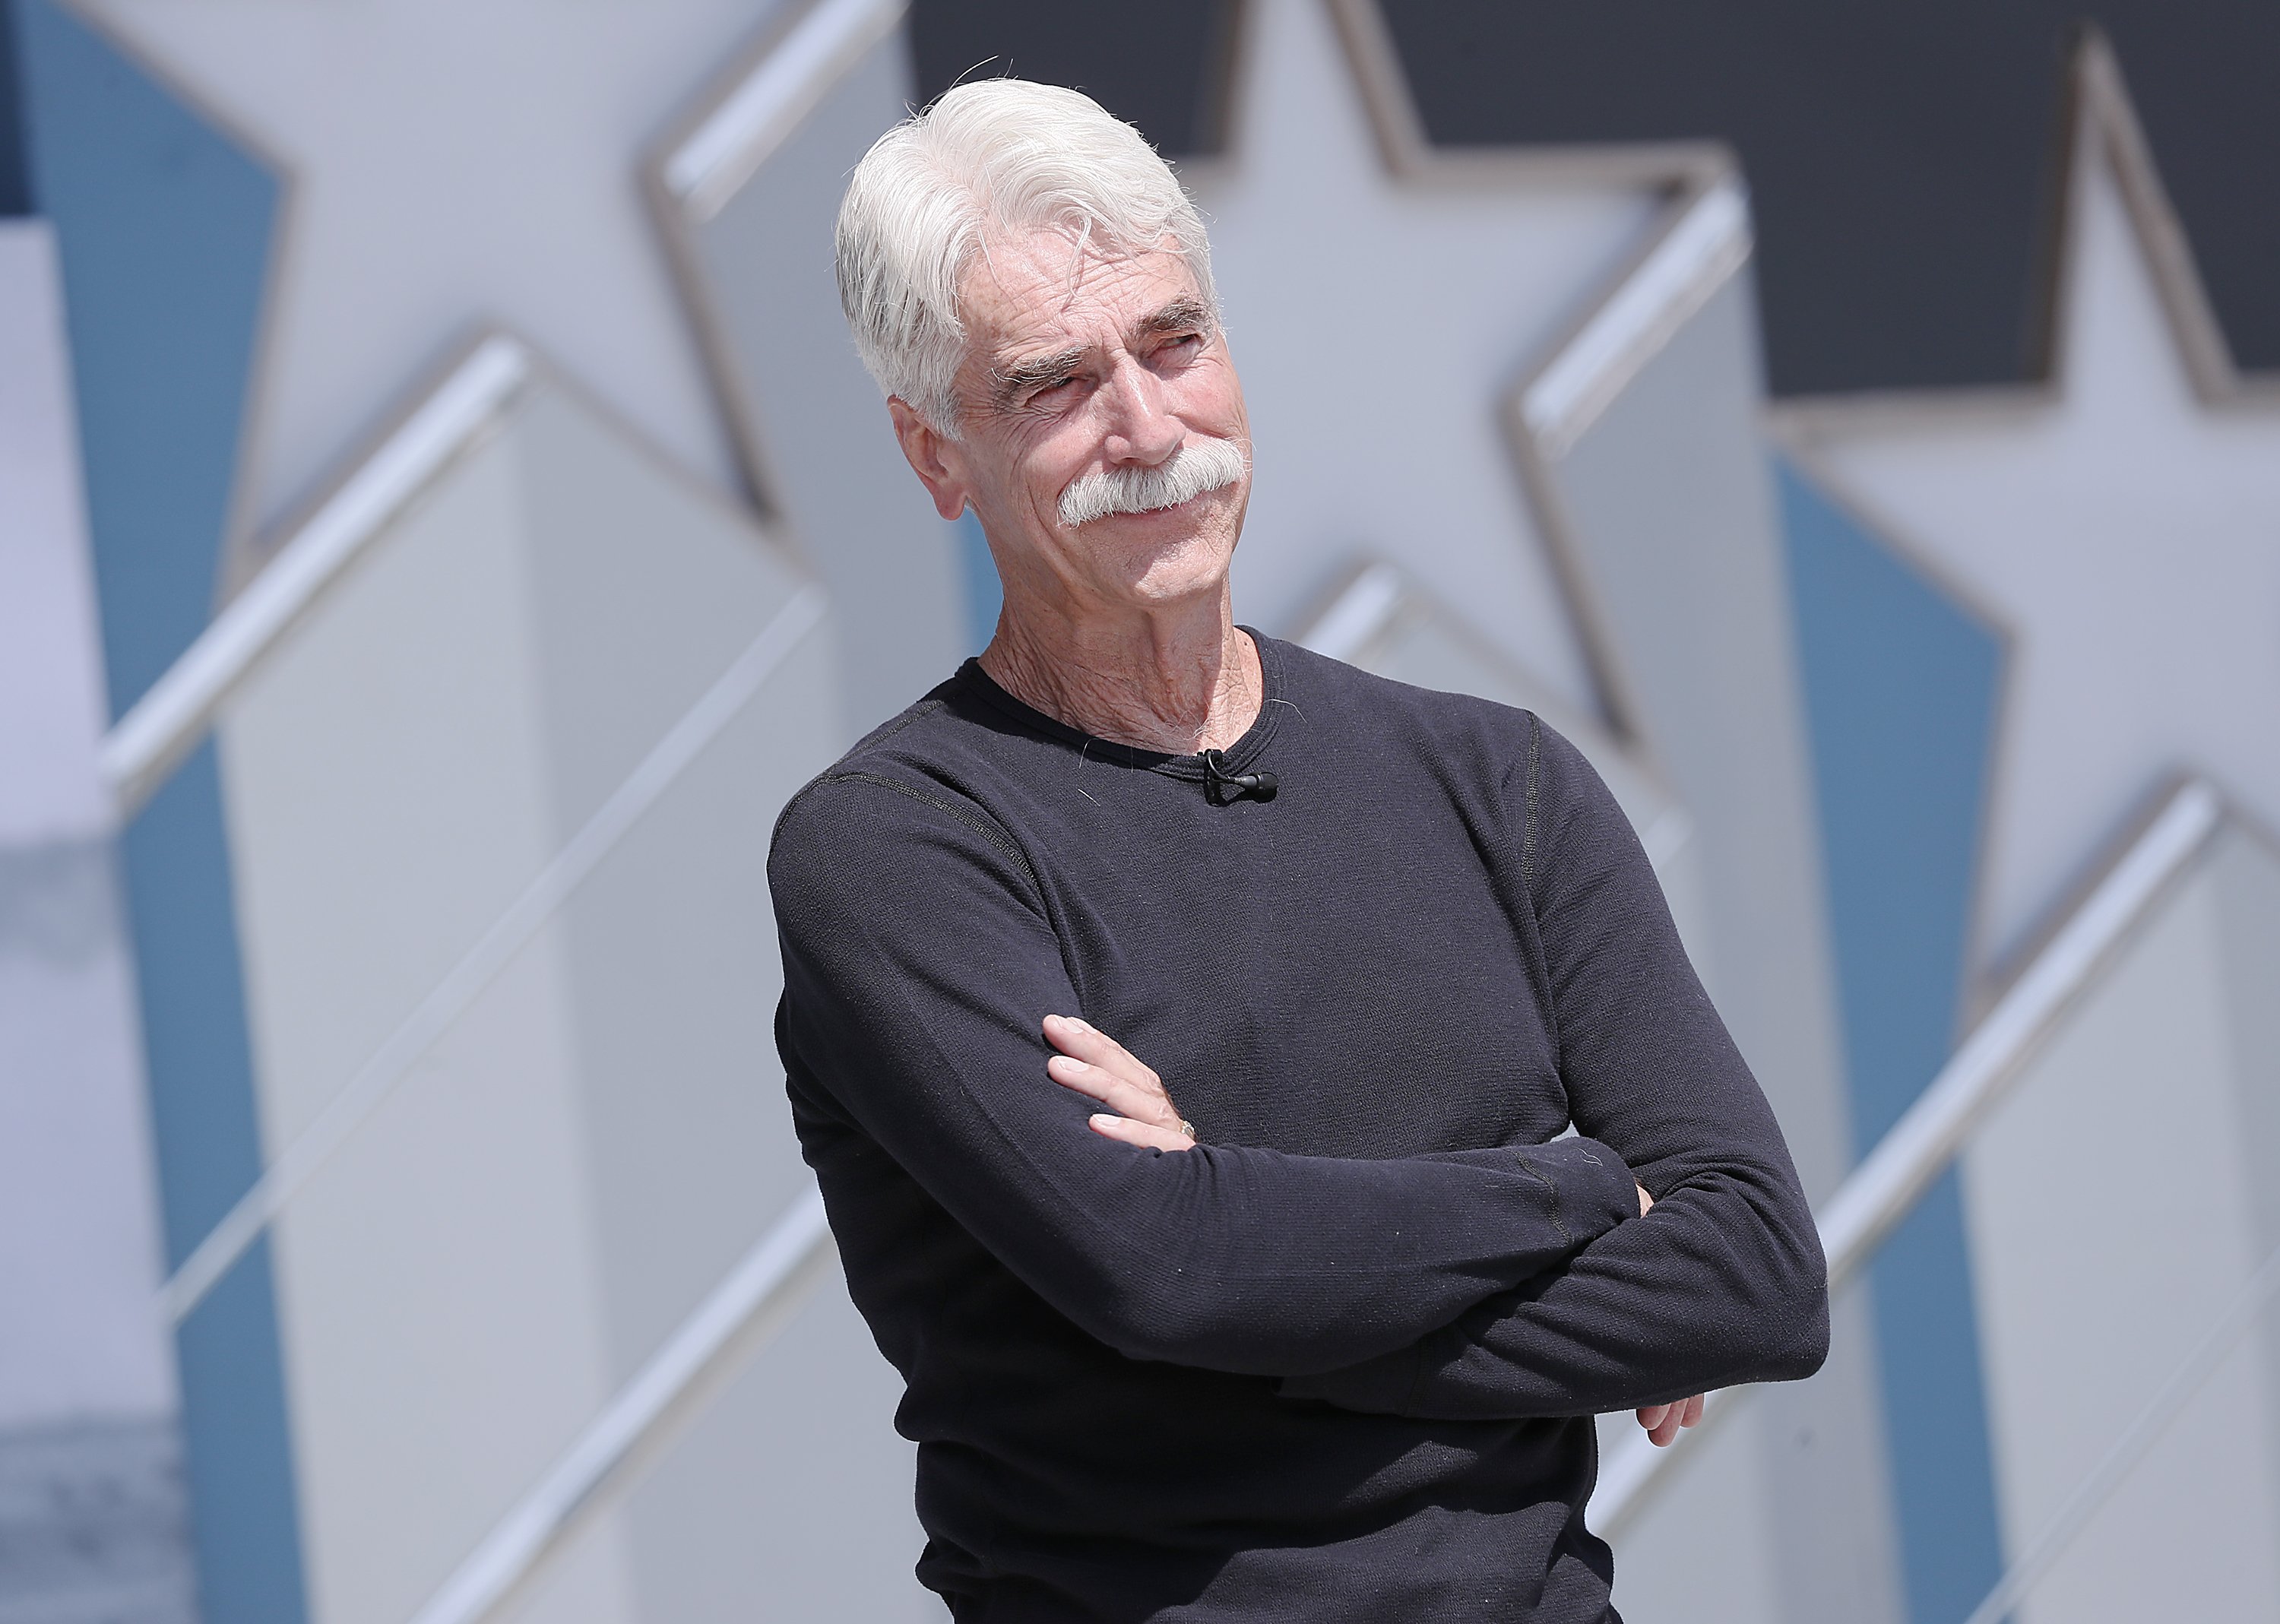 Sam Elliott  at the 2019 National Memorial Day Concert - Rehearsals  on May 25, 2019 | Photo: GettyImages